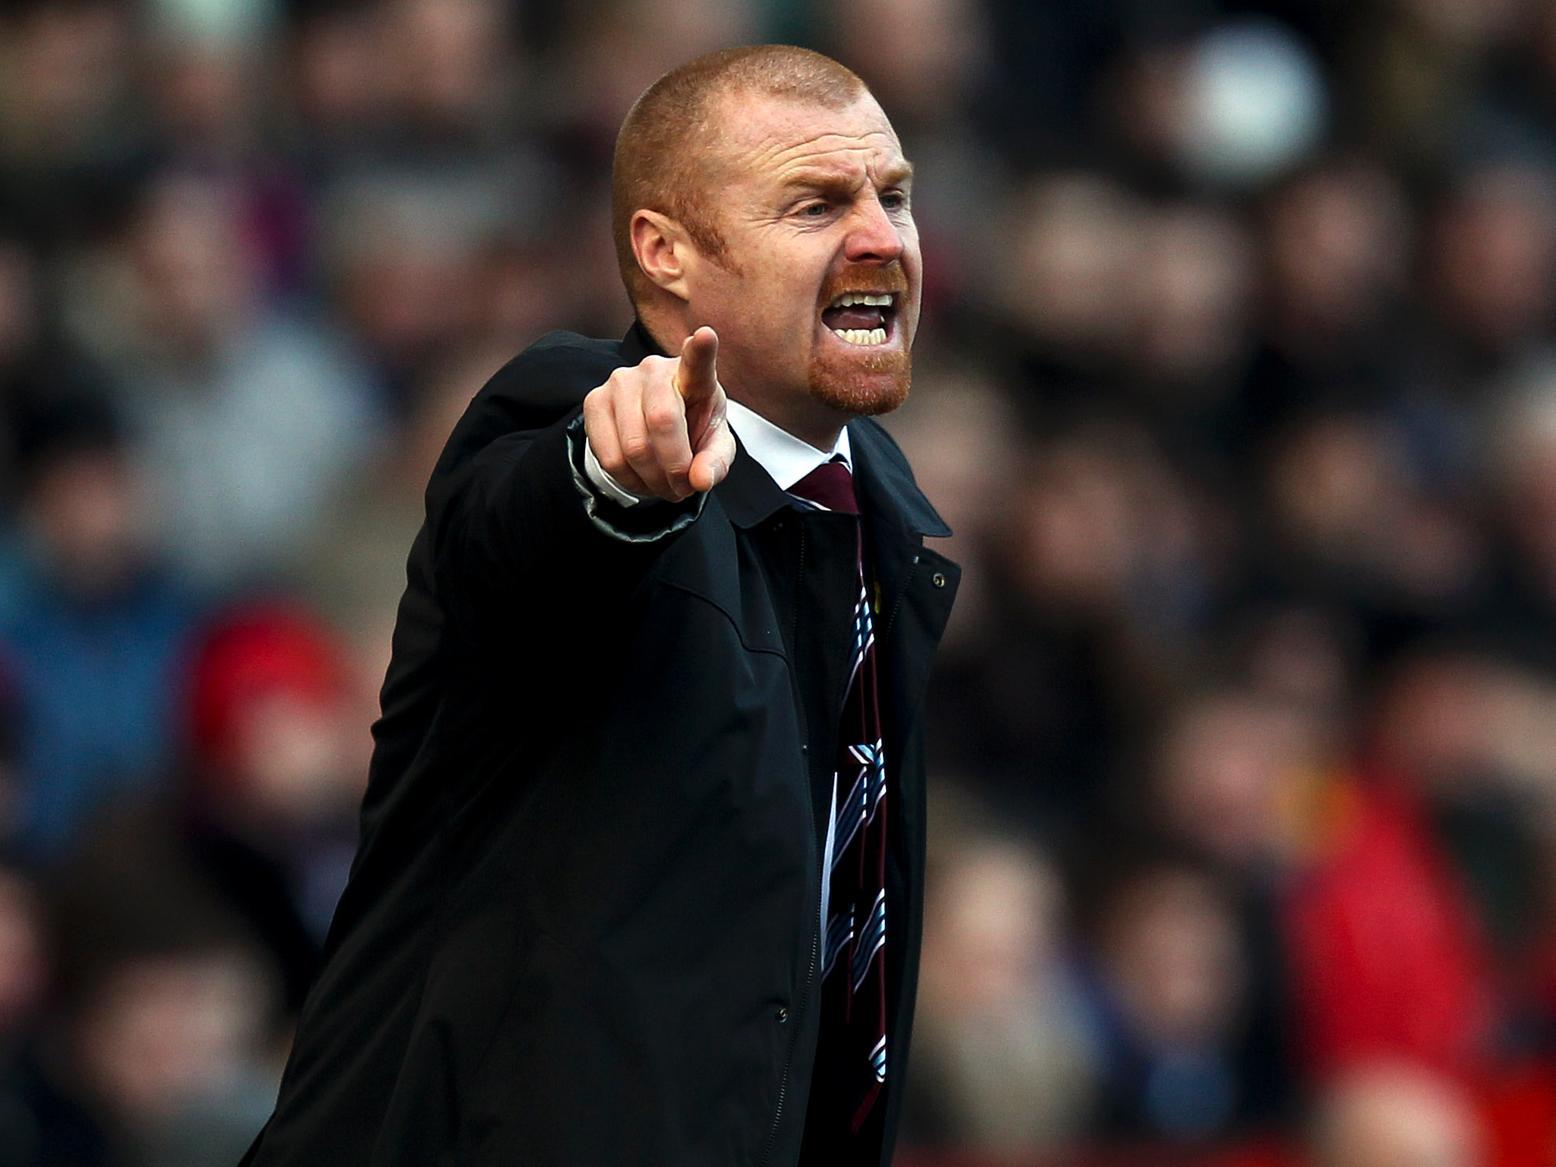 Sean Dyche on eight years at the helm at Burnley - and what lies ahead